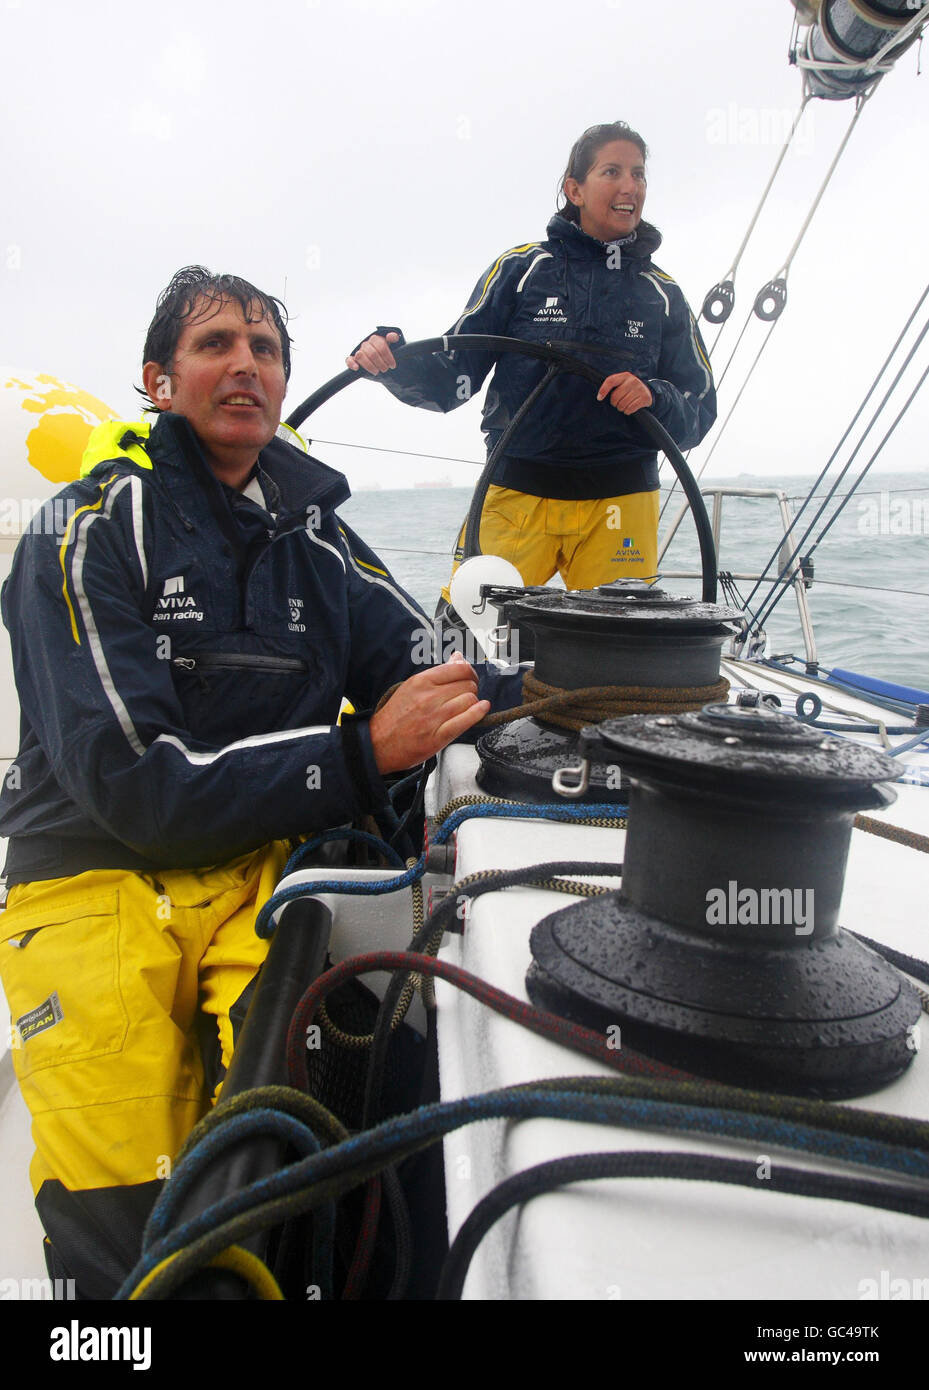 British sailing duo Dee Caffari and Brian Thompson onboard the Open 60 racing yacht Aviva ahead of the start of the ninth edition of the Transat Jacques Vabre race from France to Costa Rica on Sunday November 08. Stock Photo